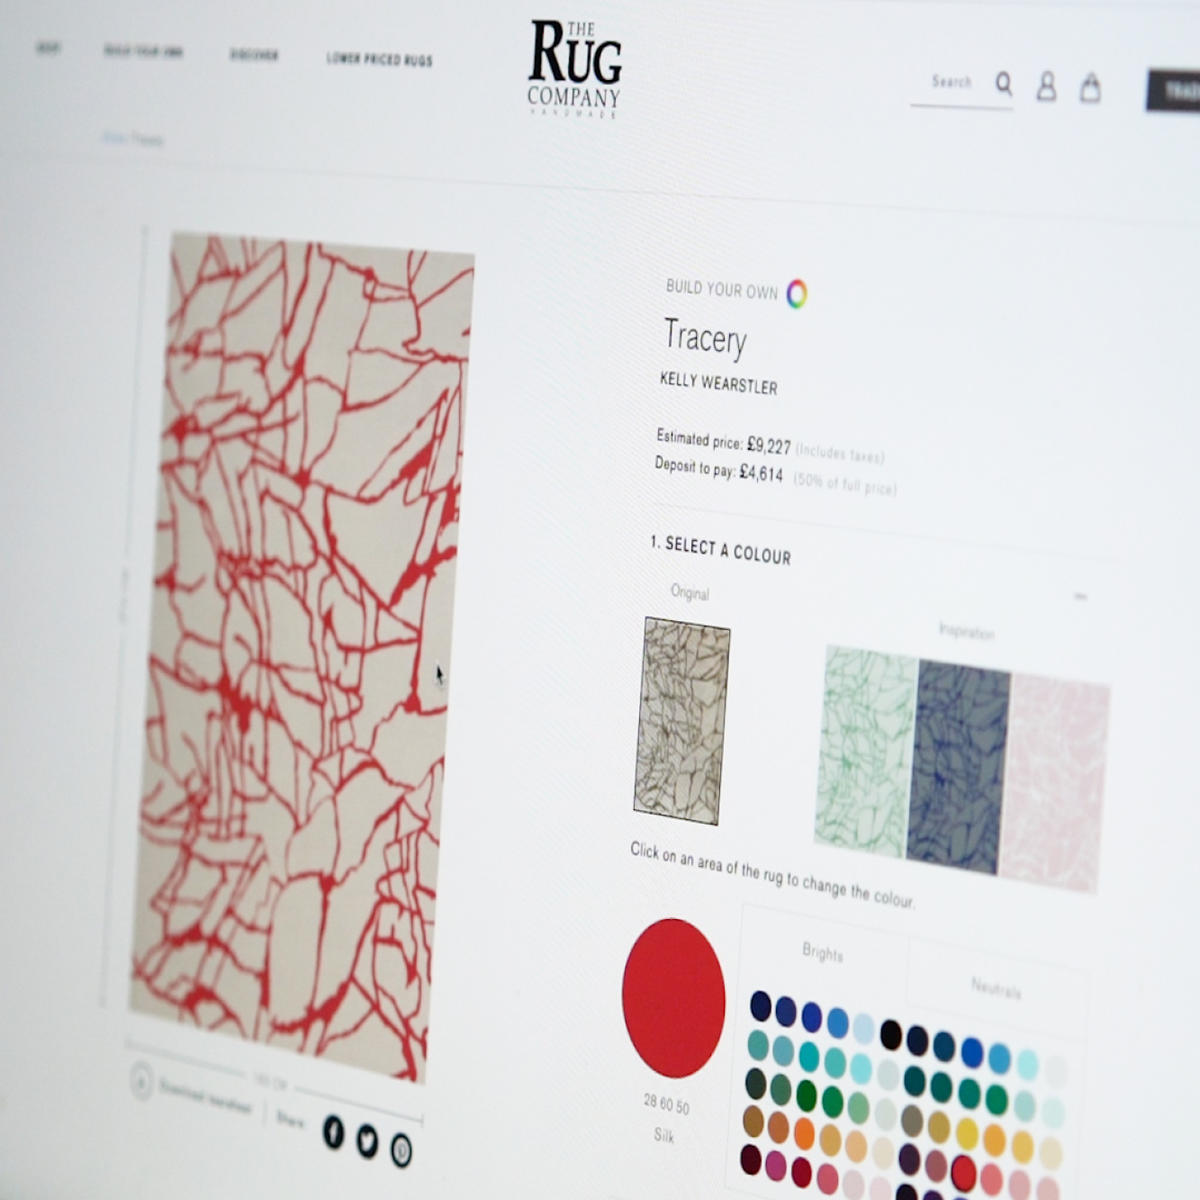 A new tool from The Rug Company allows users to choose custom colors in real time